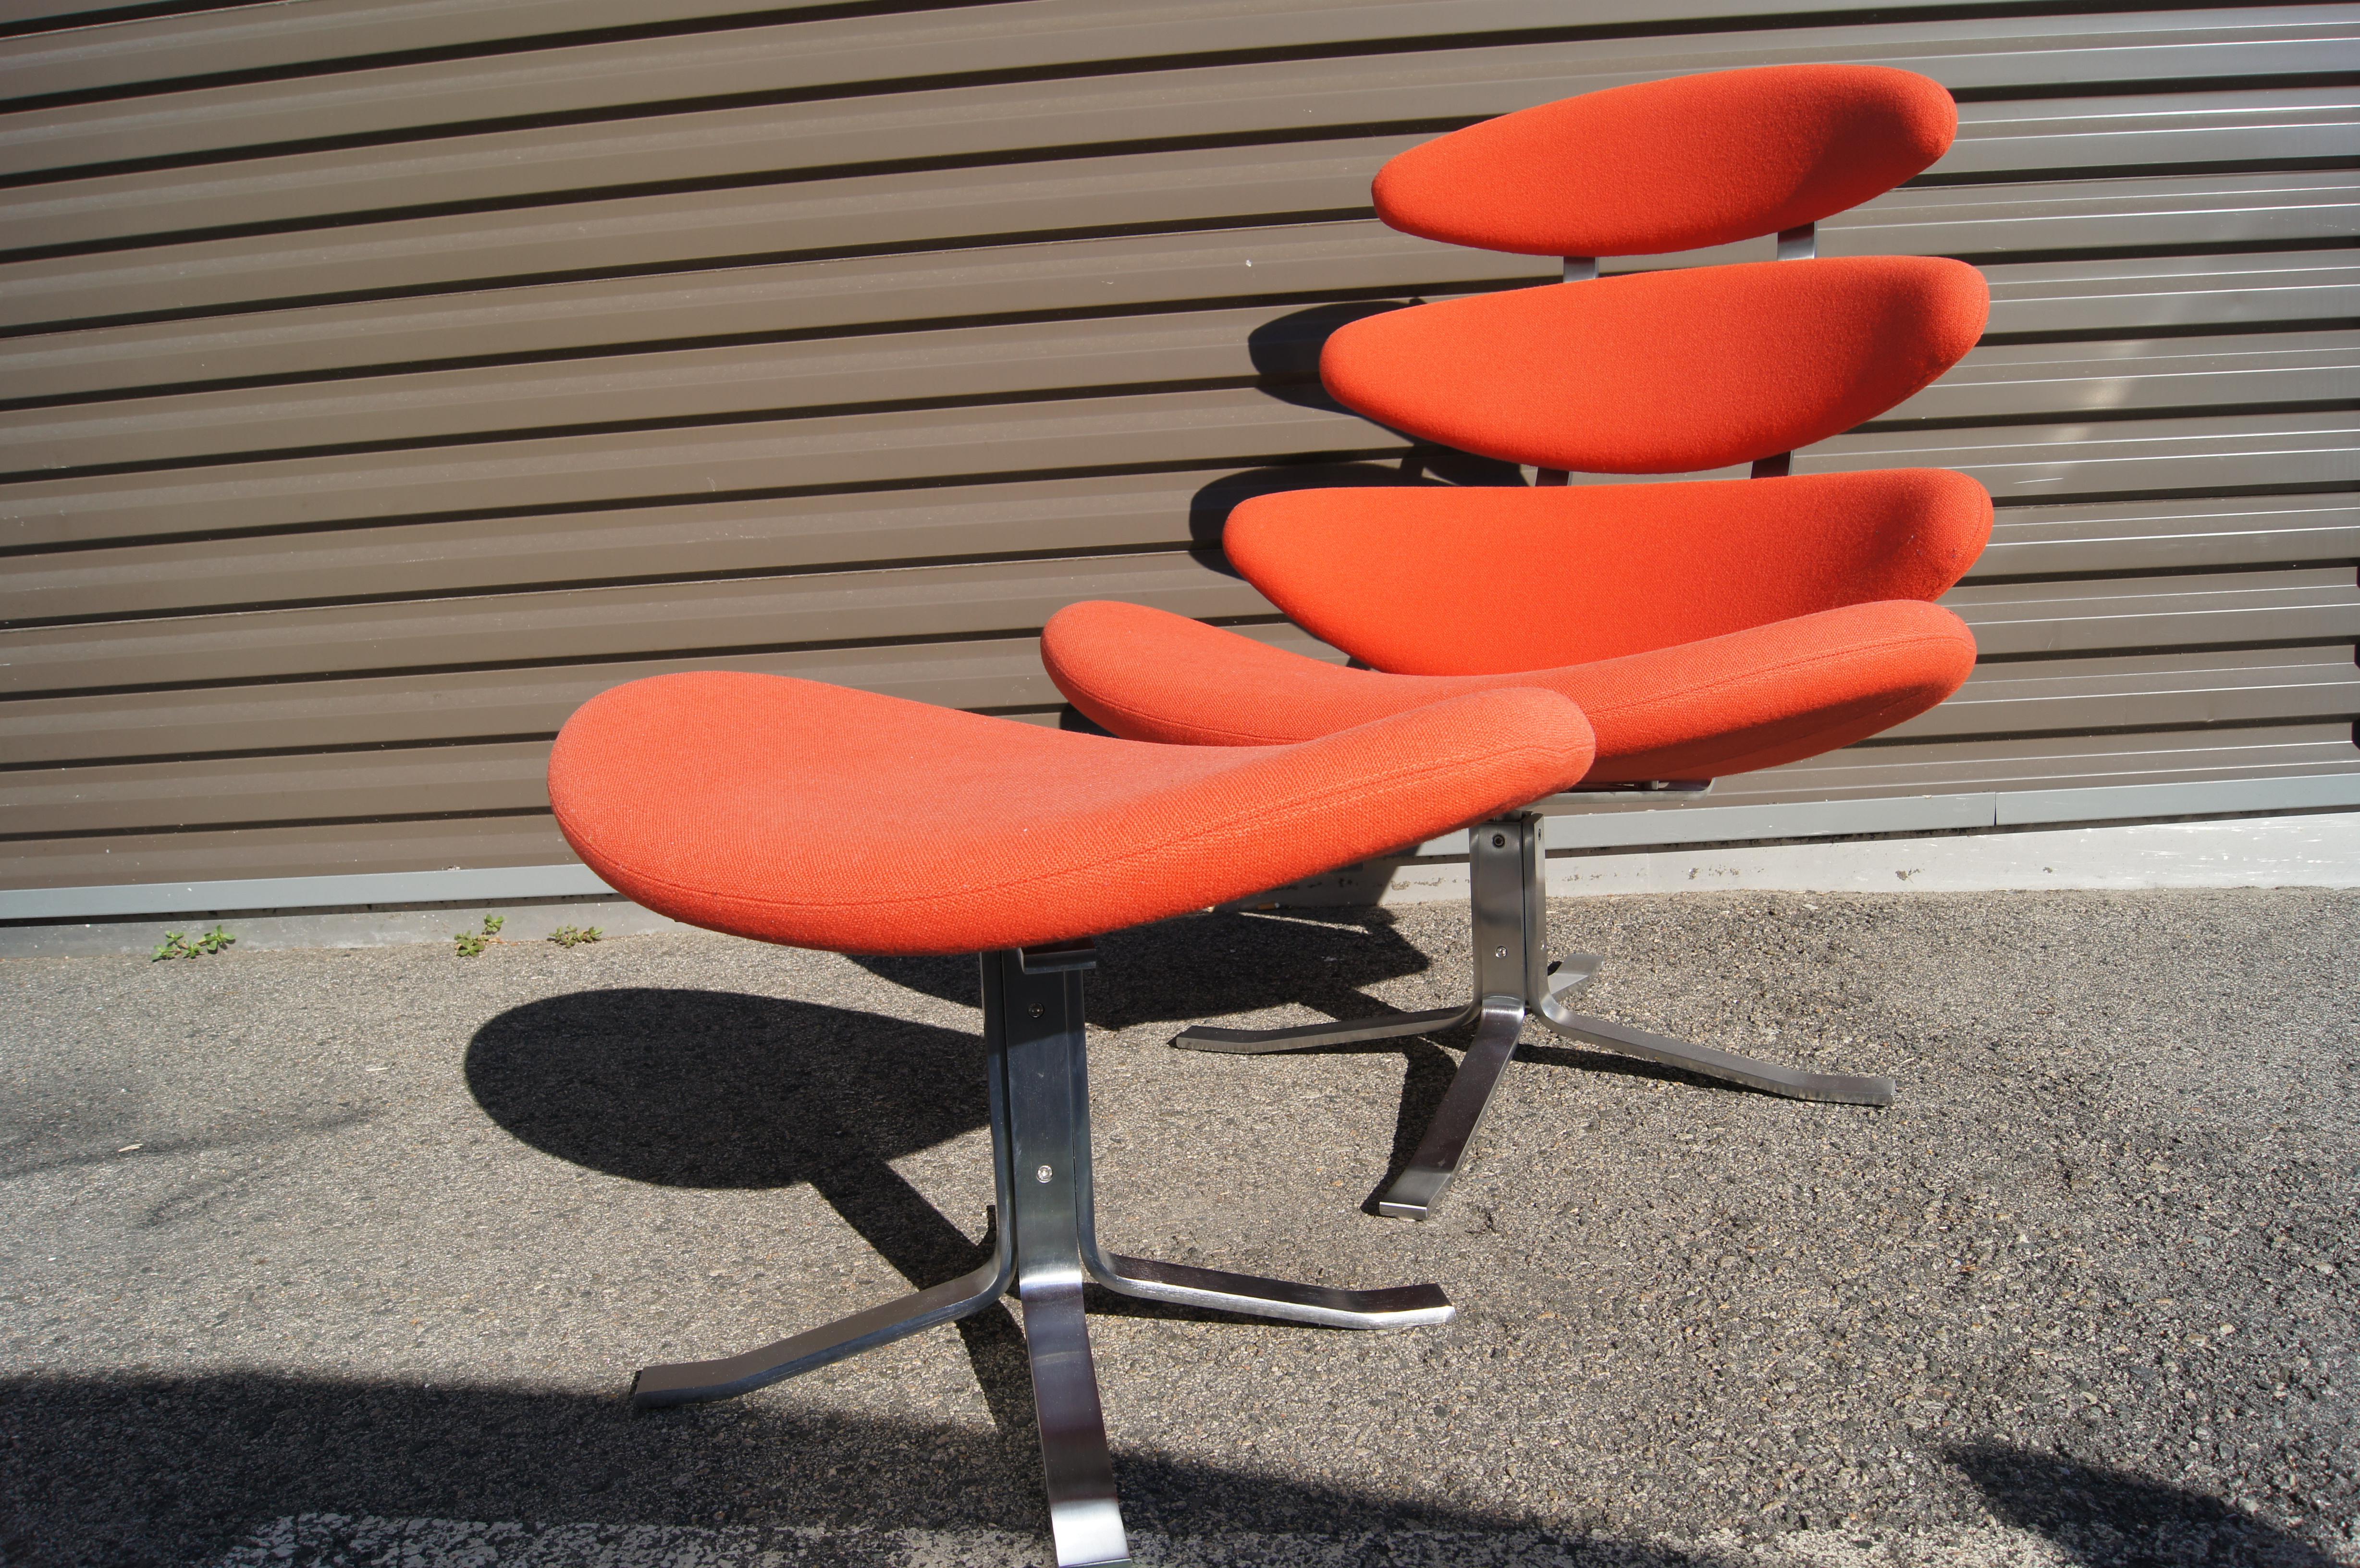 Poul M. Volther designed the classic Corona Chair for Erik Jørgensen in 1964. Four padded cushions, here in a vibrant orange, ascend a stainless-steel frame that swivels, creating a lounge chair that is both comfortable and visually